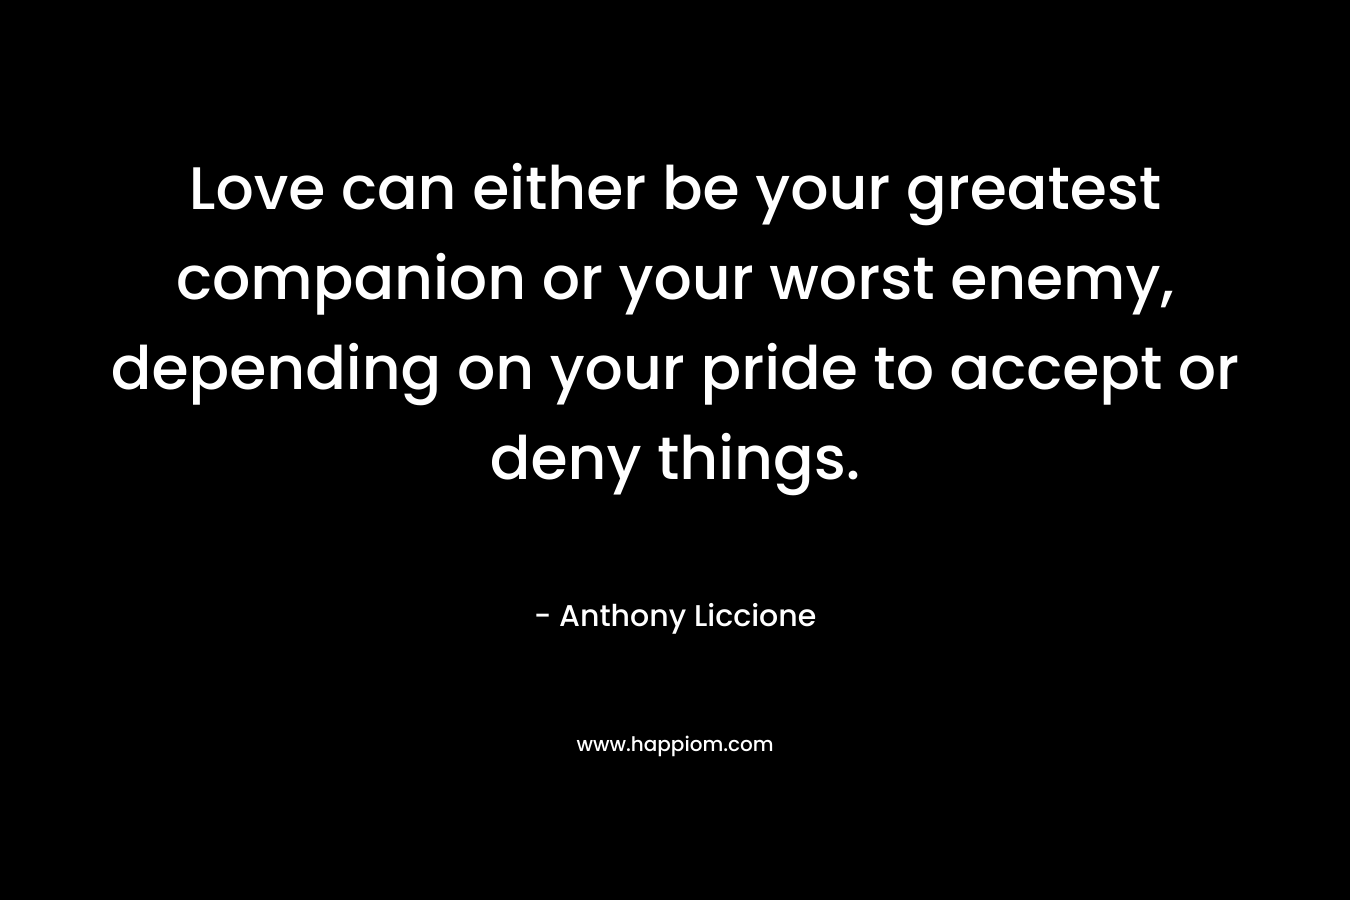 Love can either be your greatest companion or your worst enemy, depending on your pride to accept or deny things.